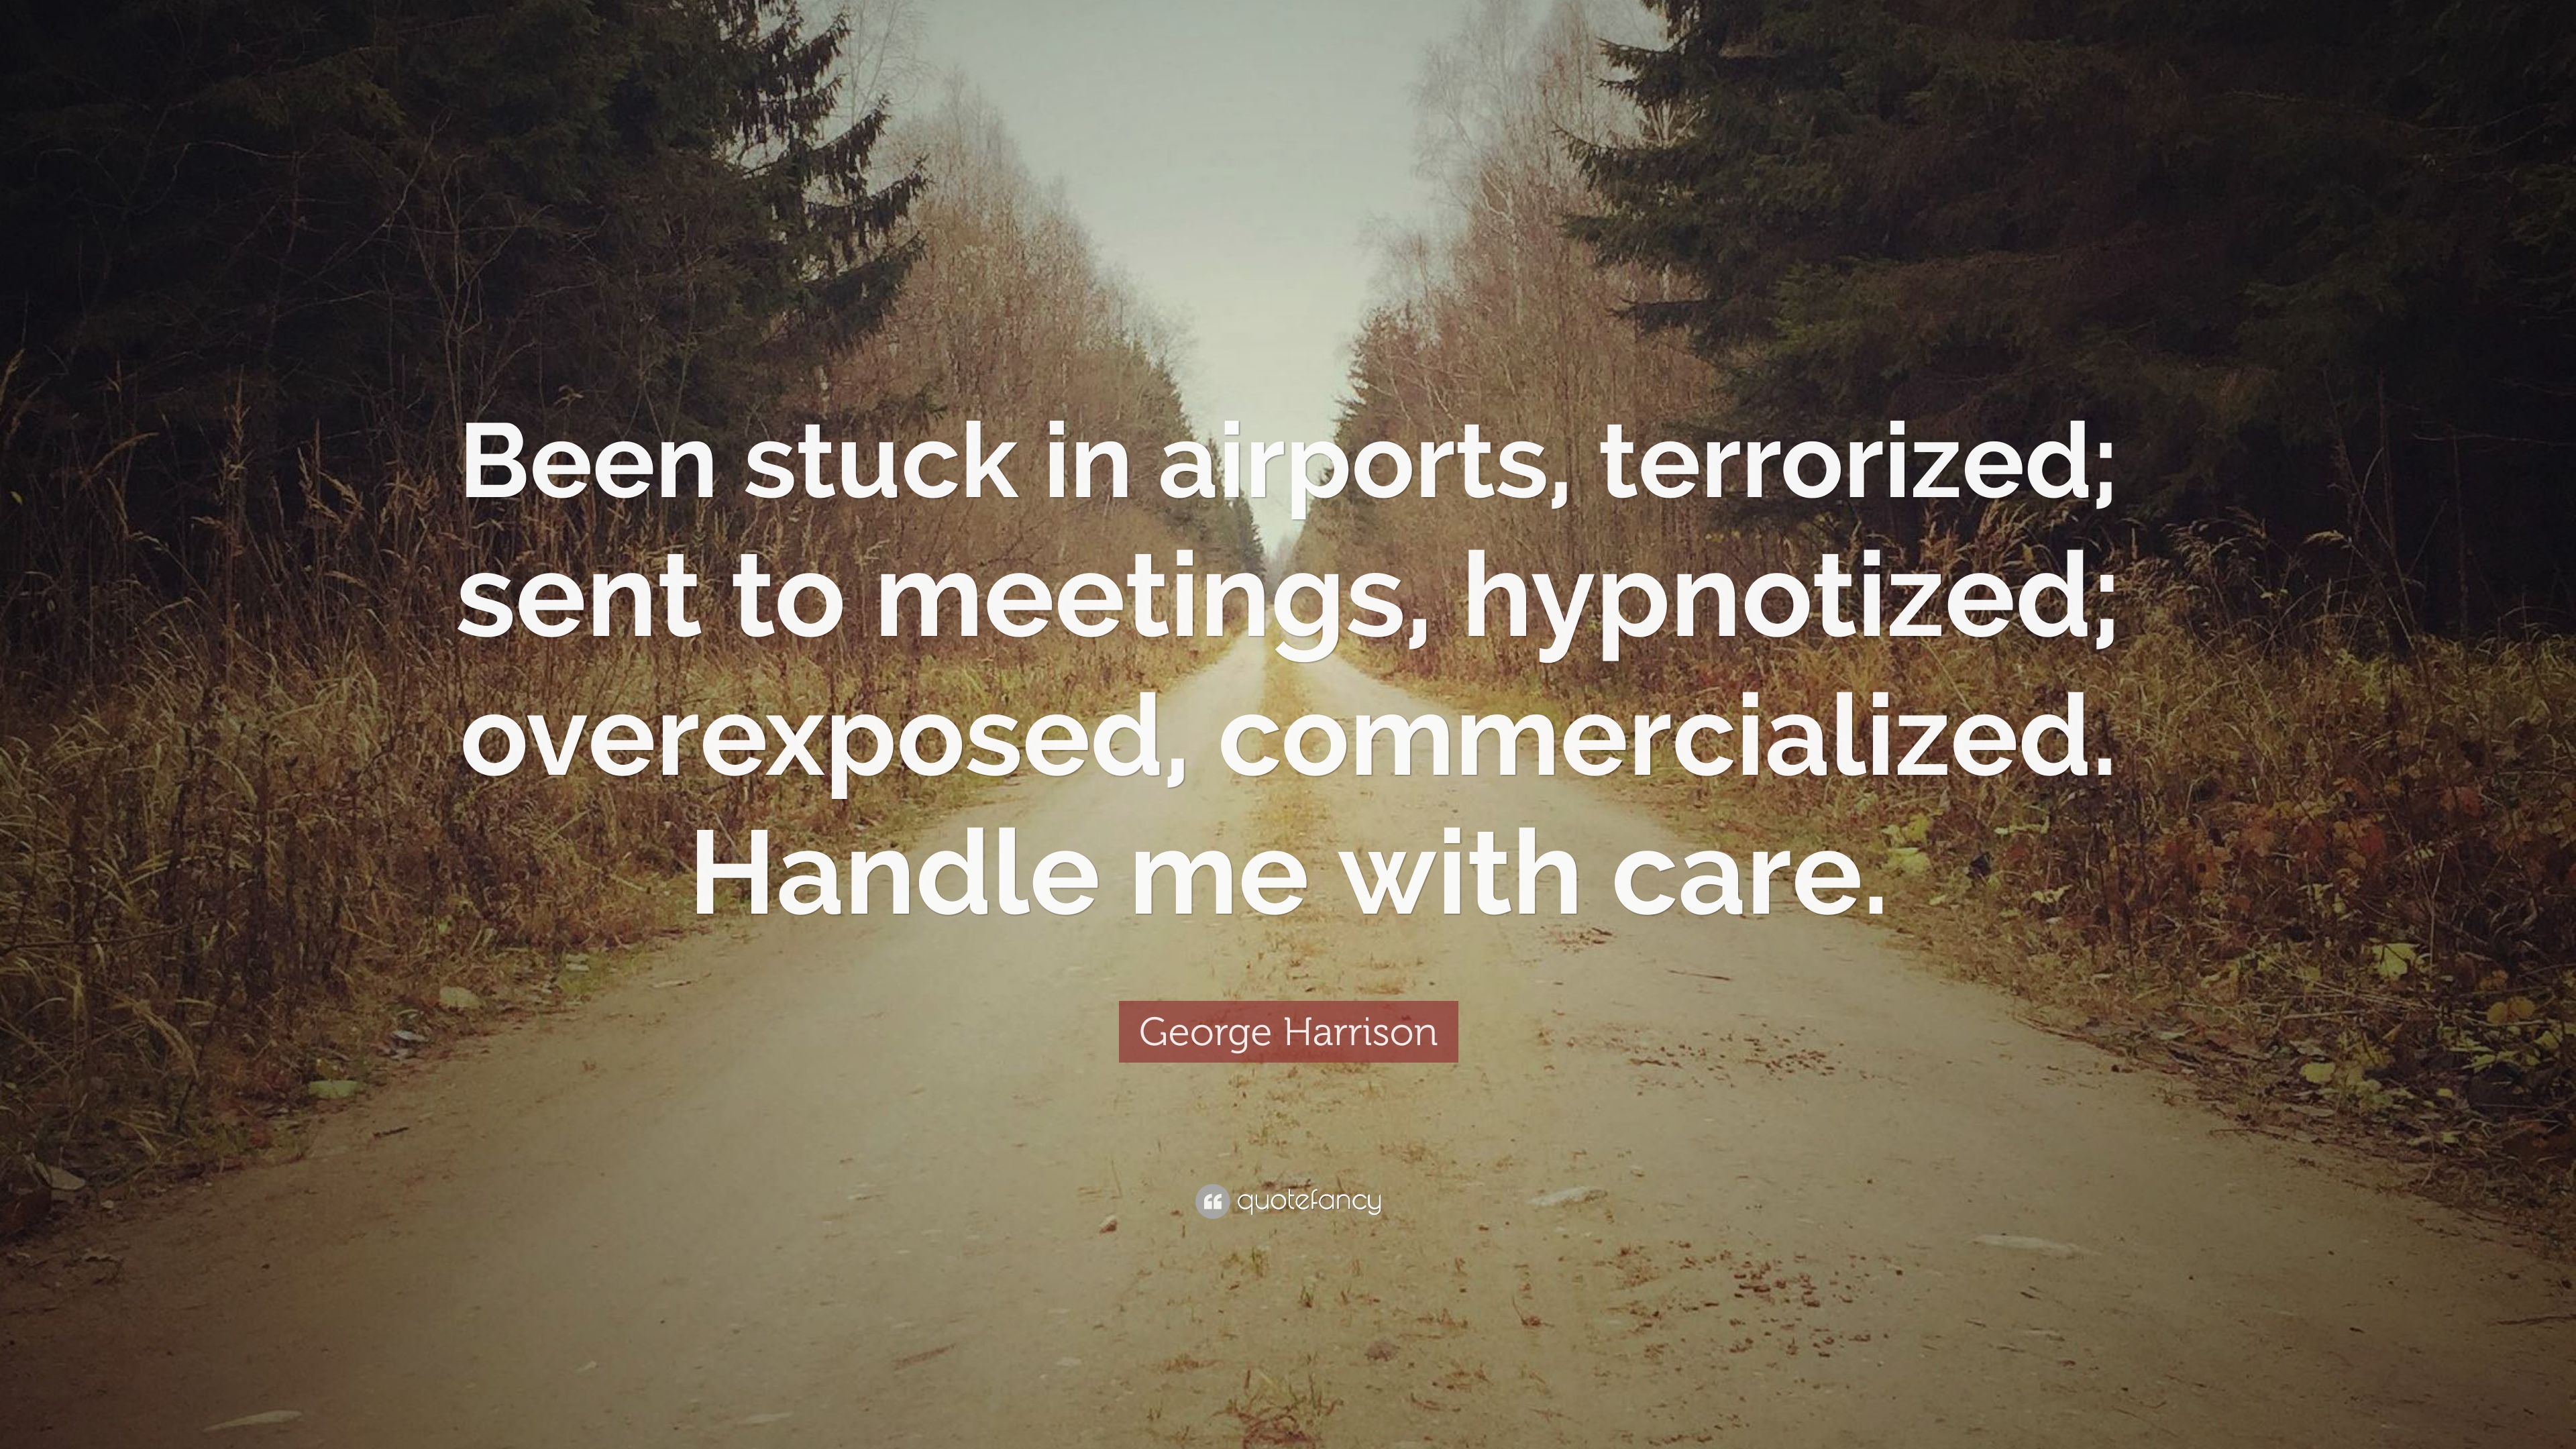 George Harrison Quote: “Been stuck in airports, terrorized; sent to